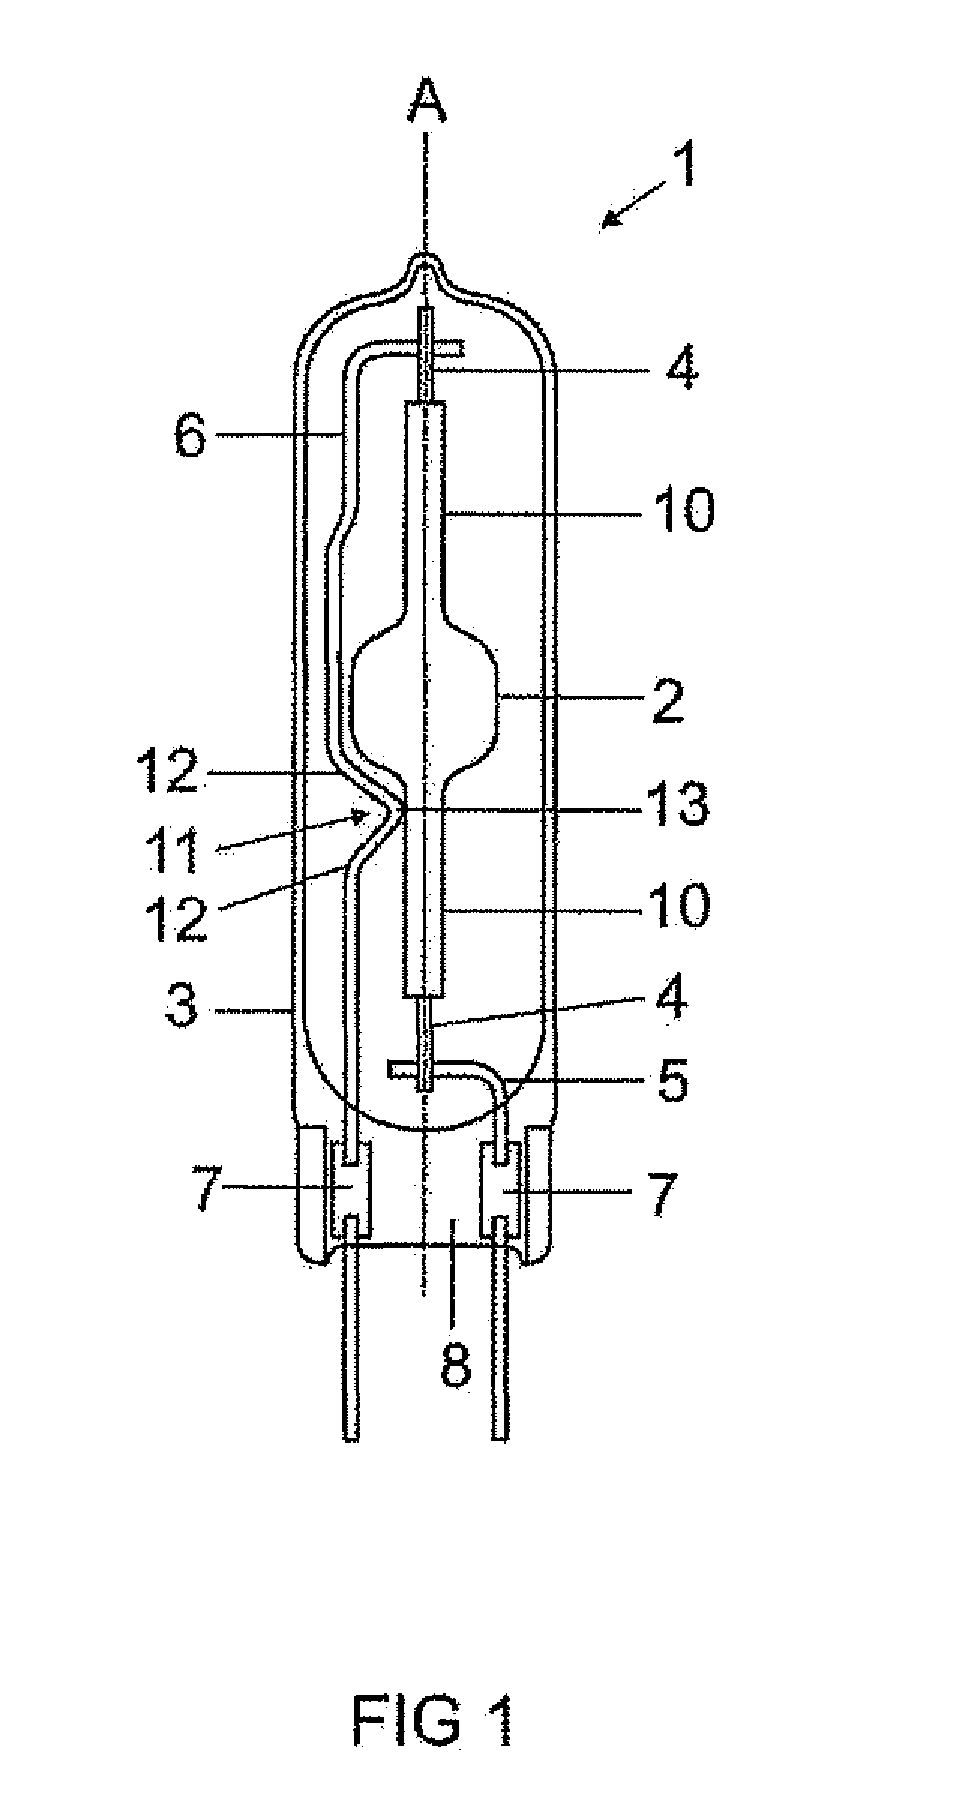 High-pressure discharge lamp with starting aid